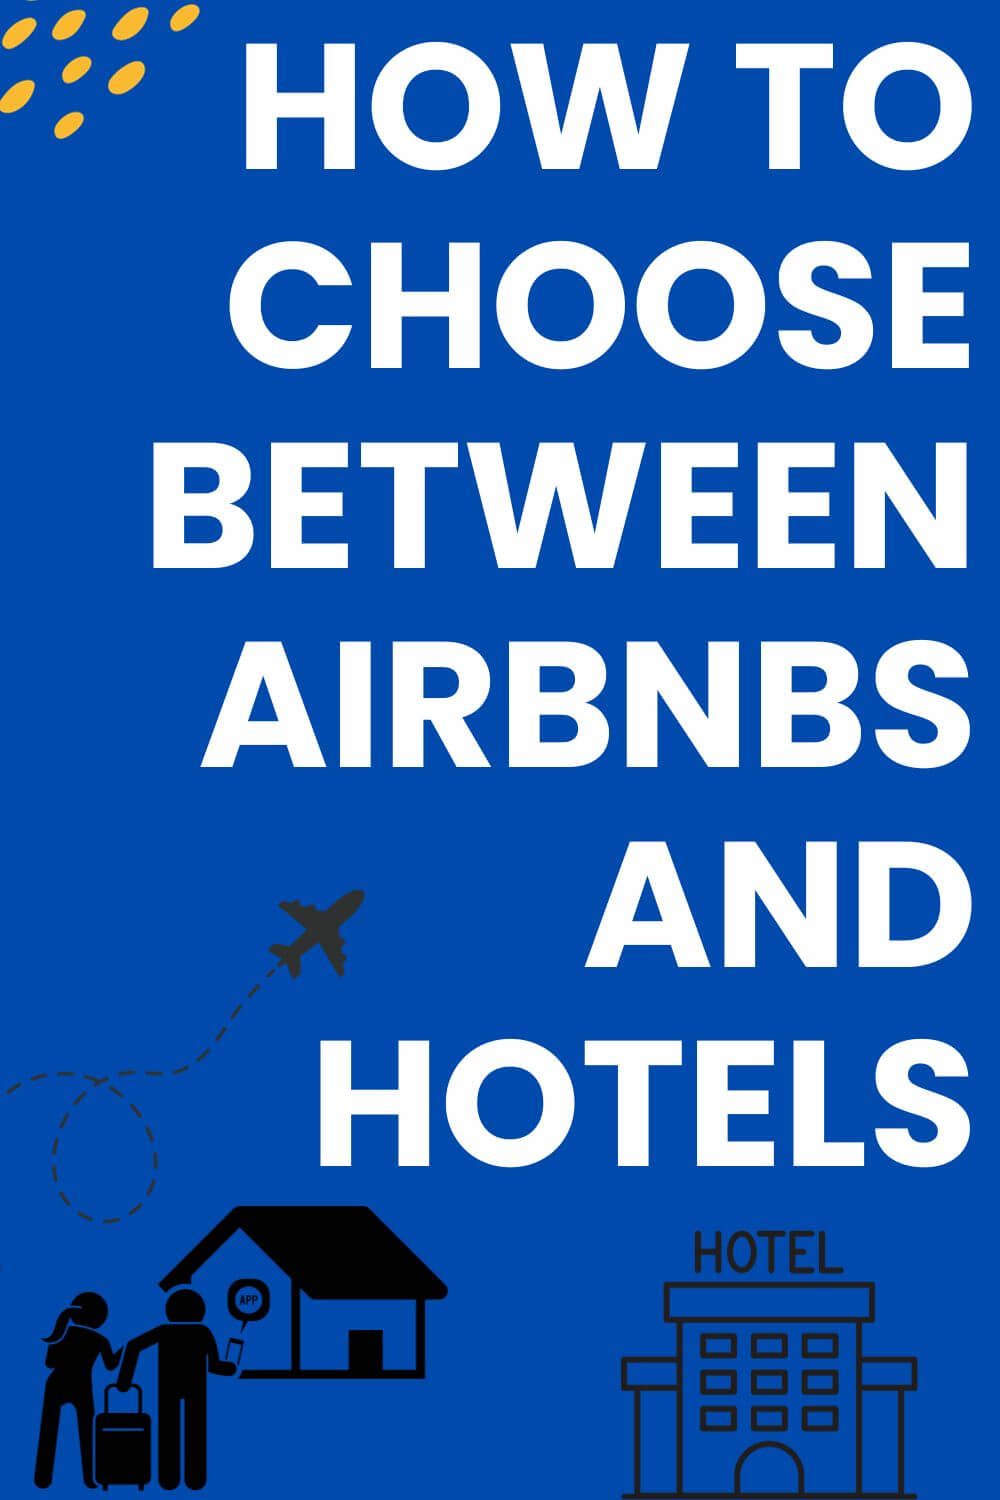 How To Choose Between Airbnb and Hotels